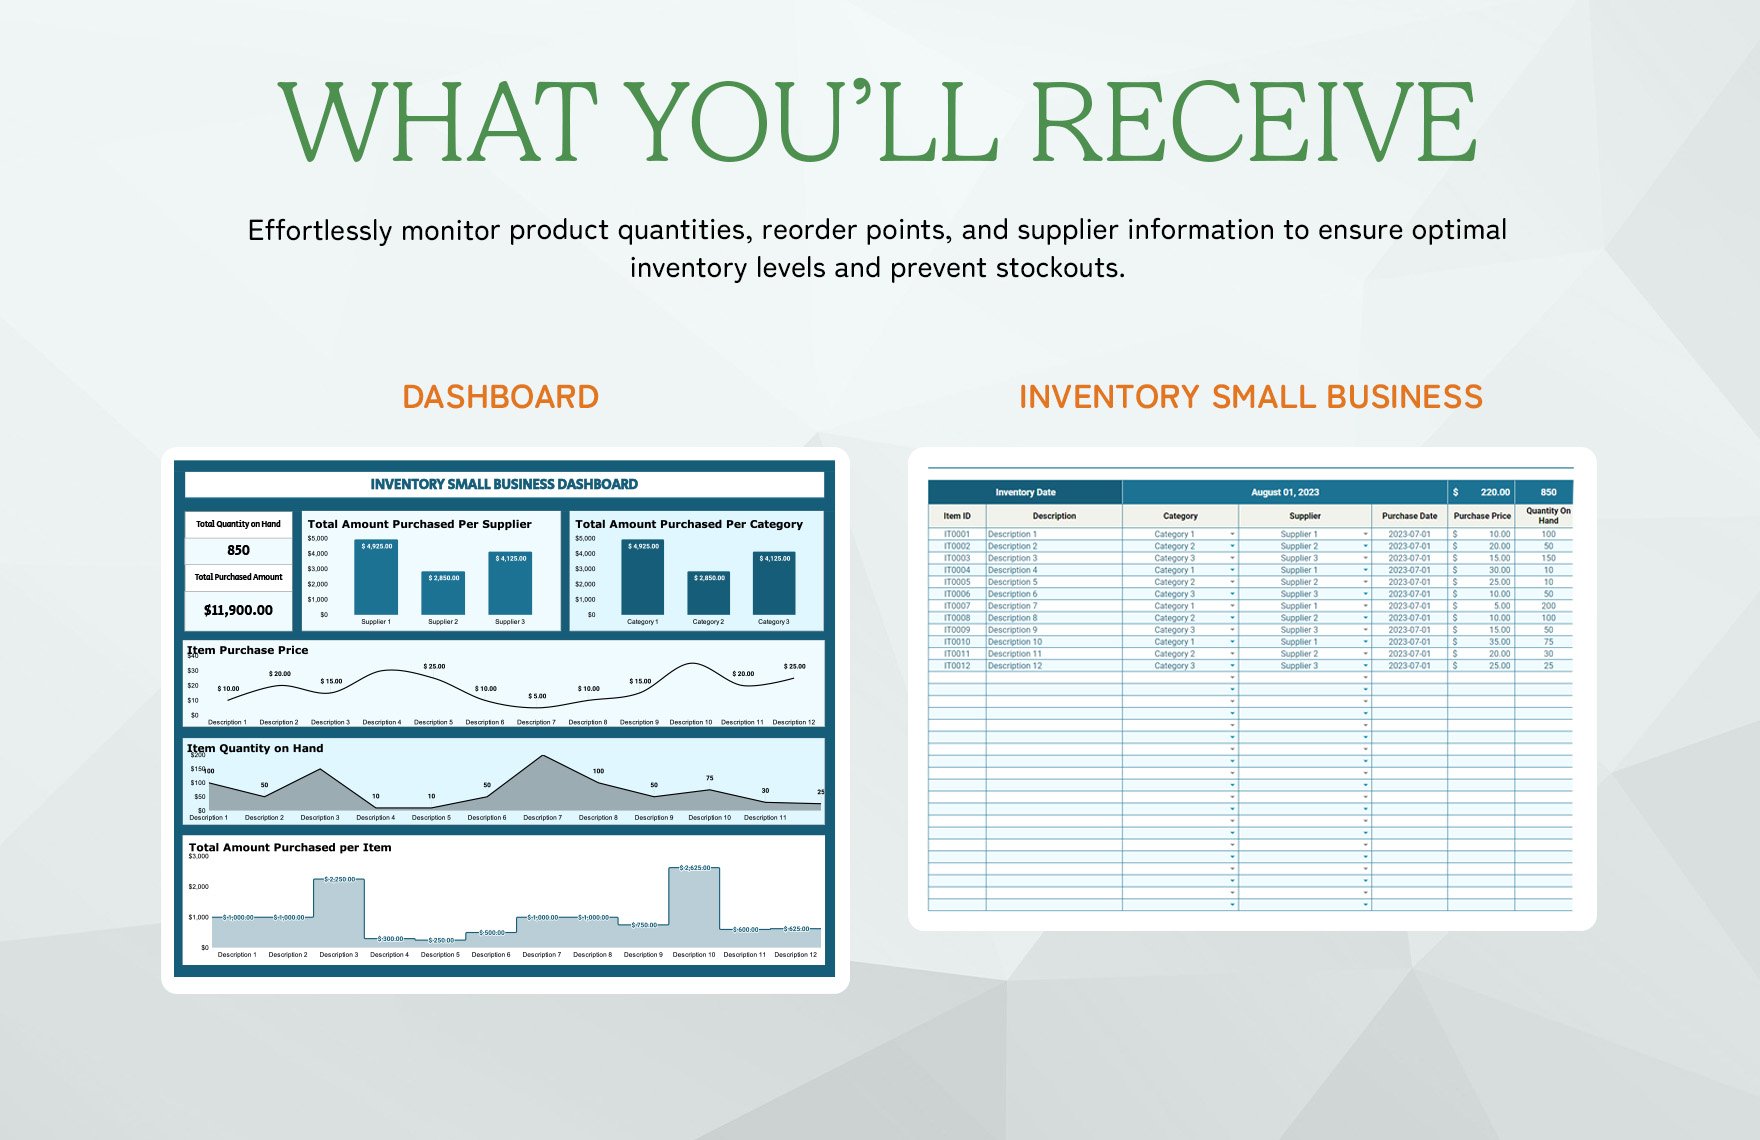 Inventory Small Business Template